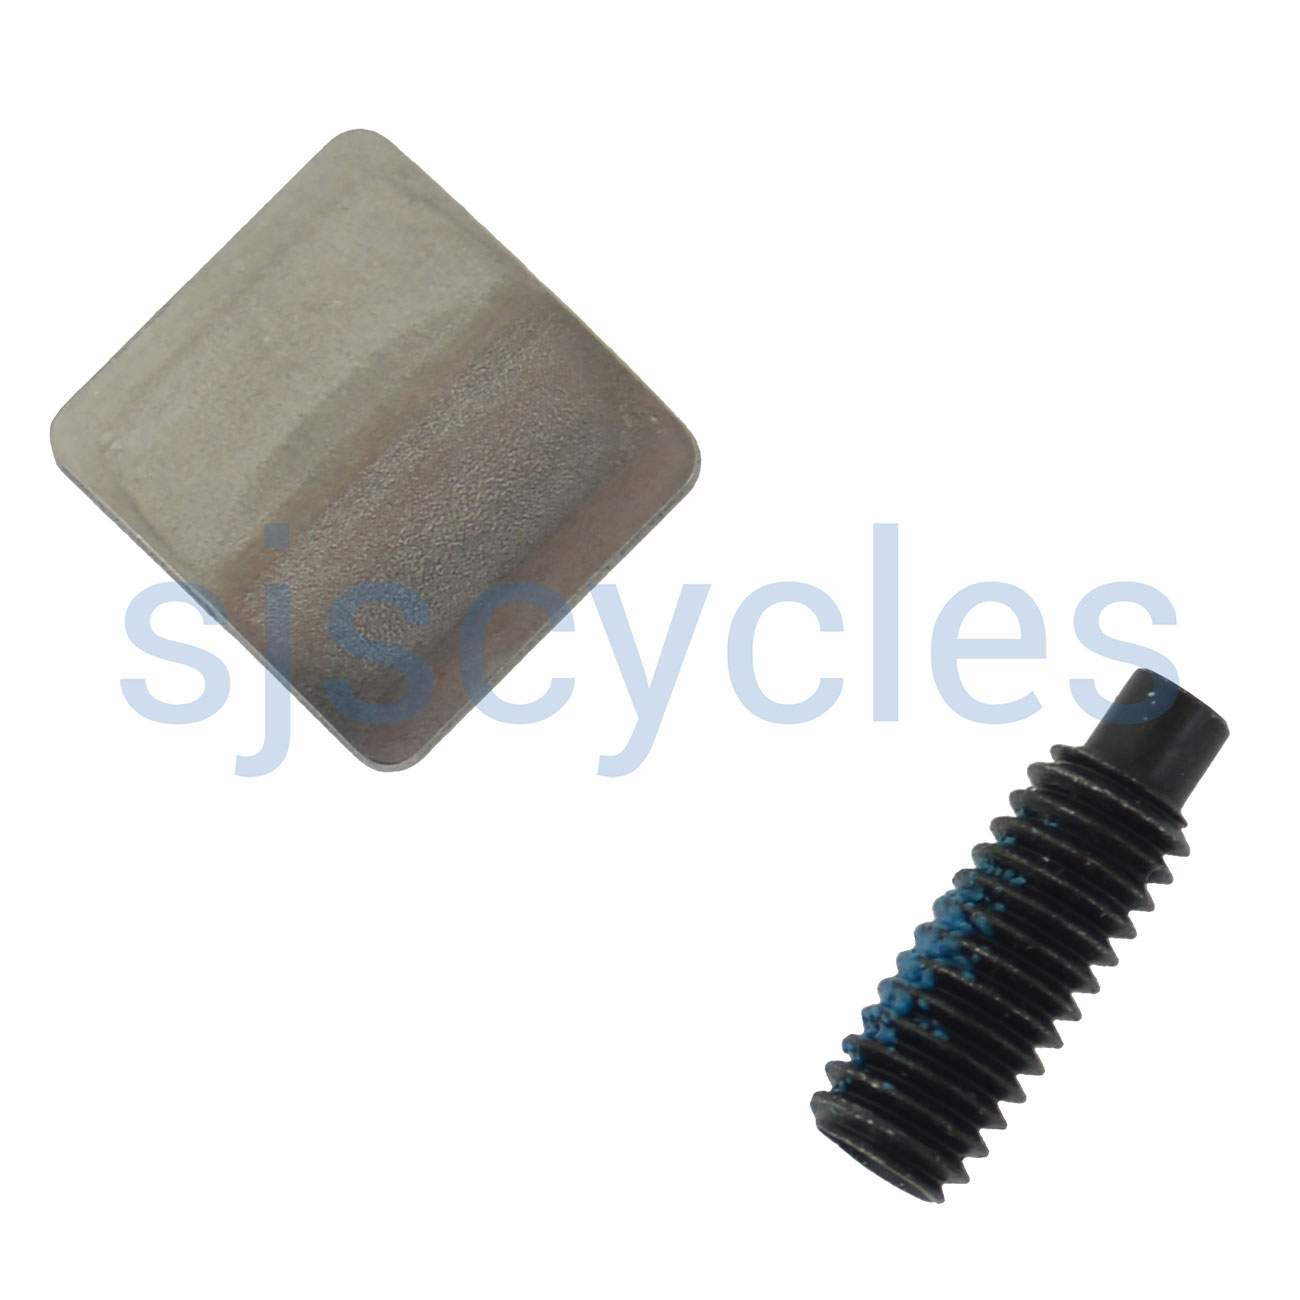 Shimano Fd-r8000 Support Bolt & Plate Y2BA98020 for sale online 